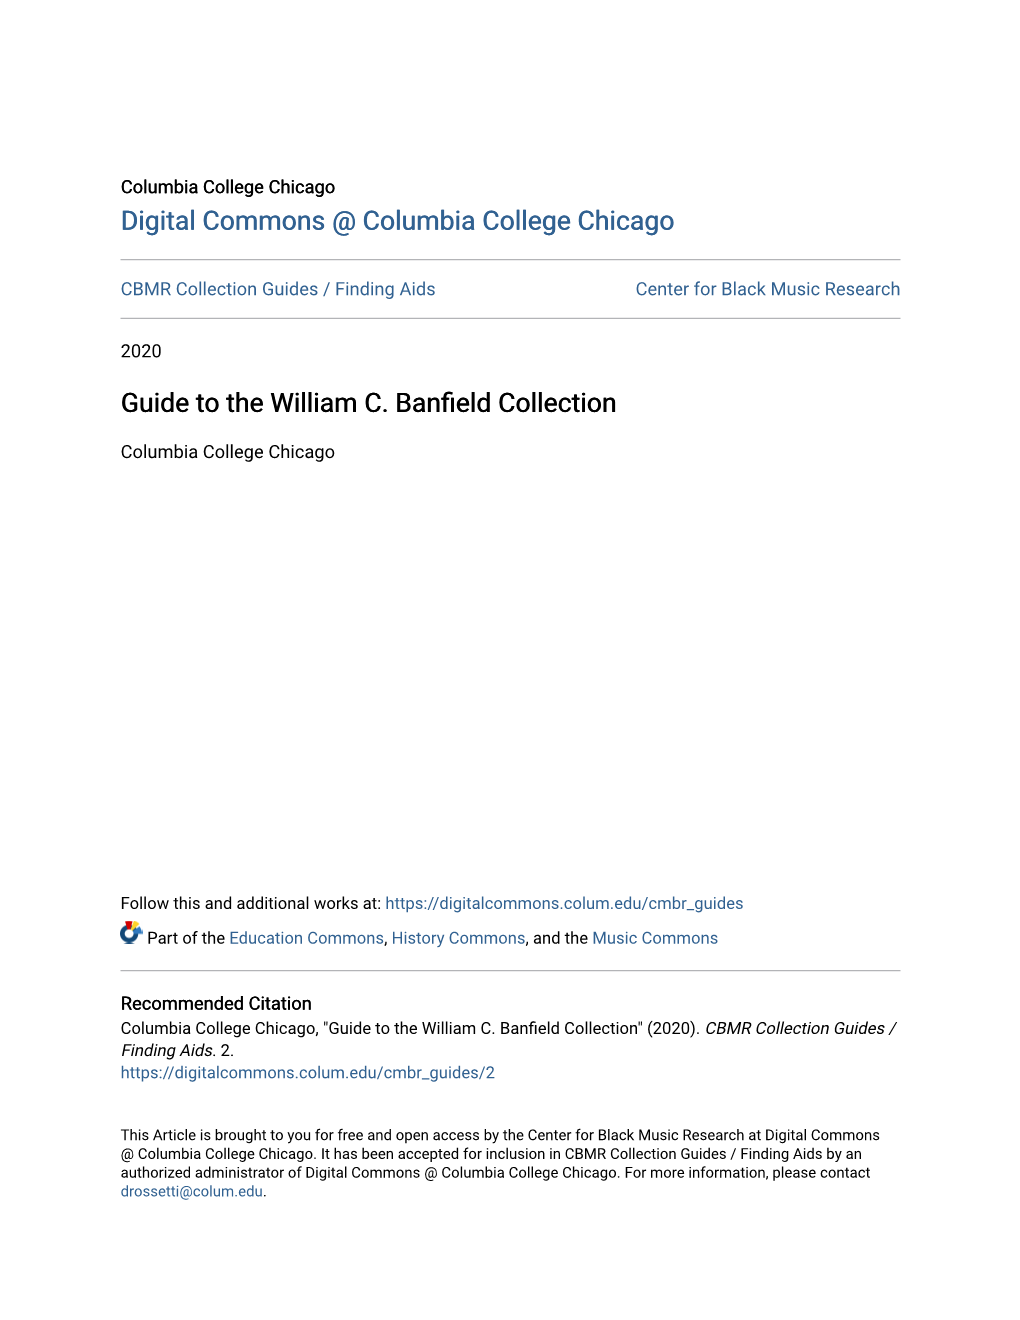 Guide to the William C. Banfield Collection